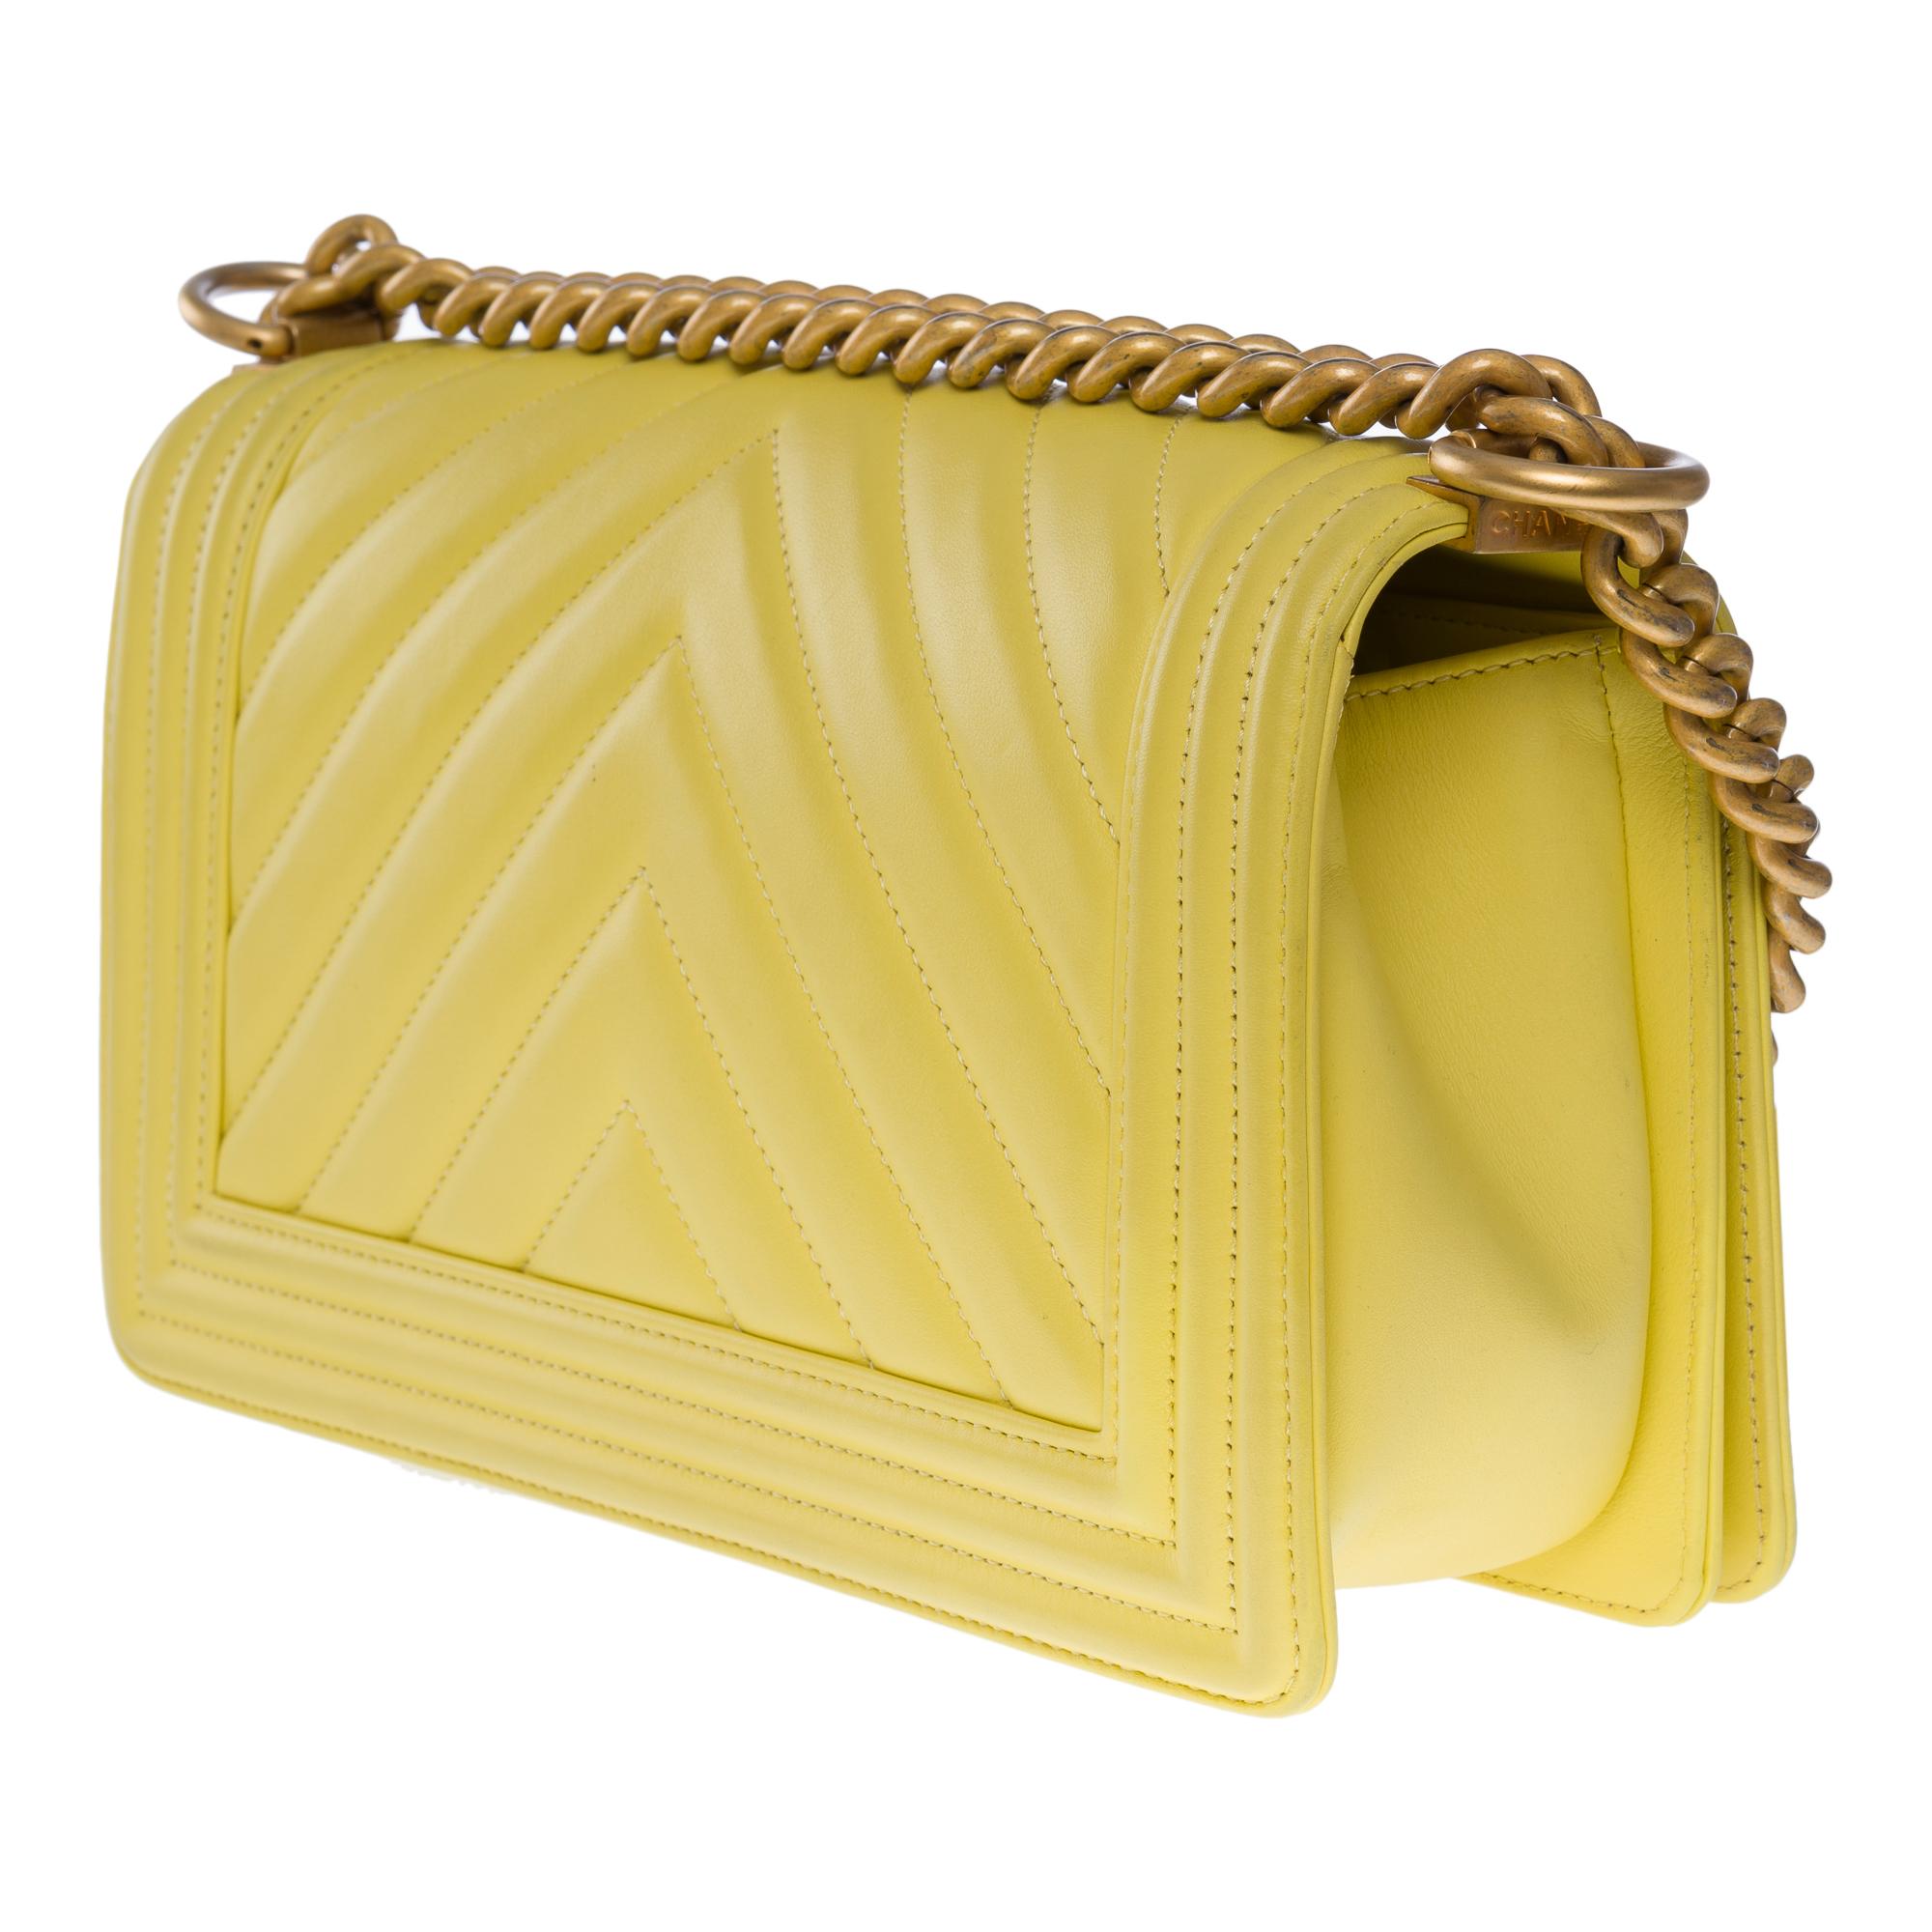 Chanel Boy Old Medium shoulder bag in Yellow quilted herringbone leather, MGHW For Sale 1